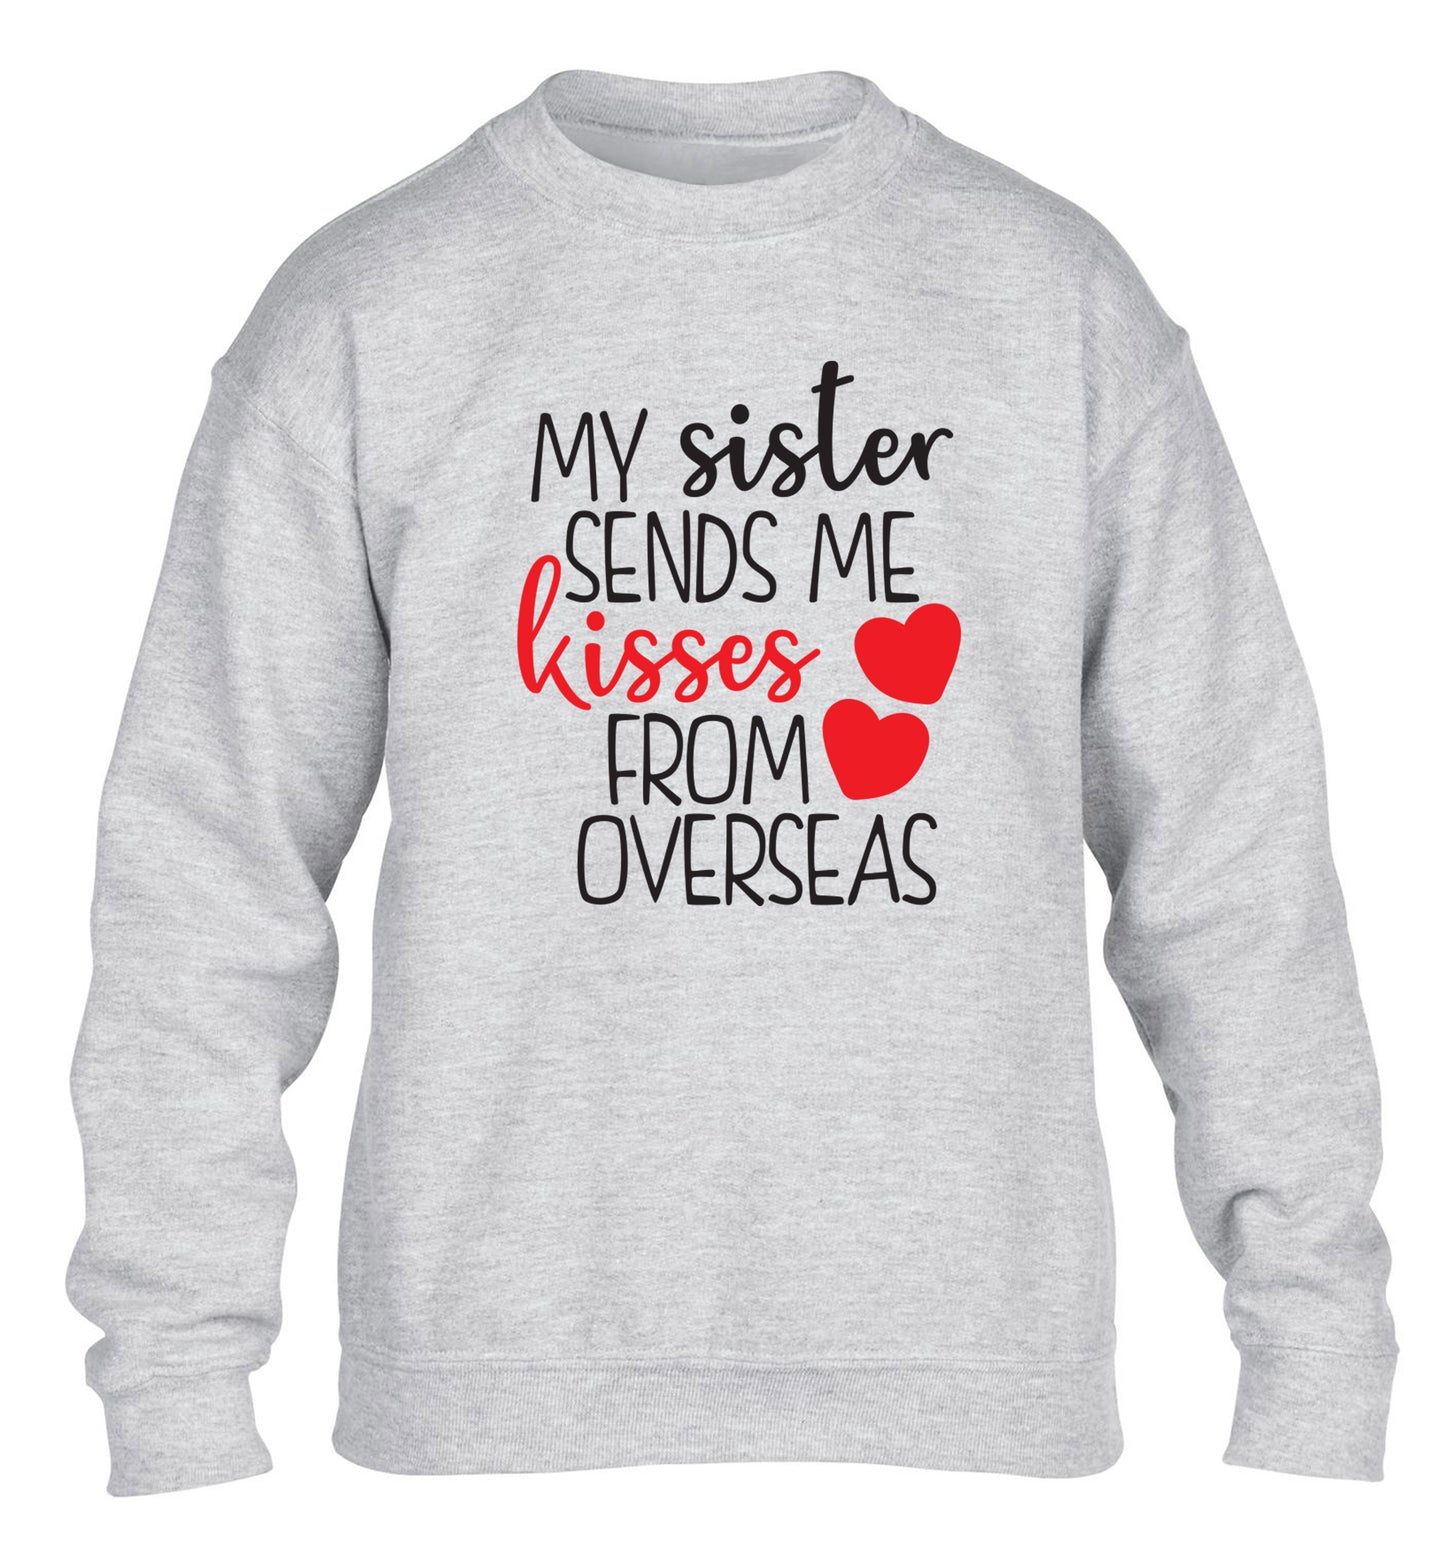 My sister sends me kisses from overseas children's grey sweater 12-13 Years